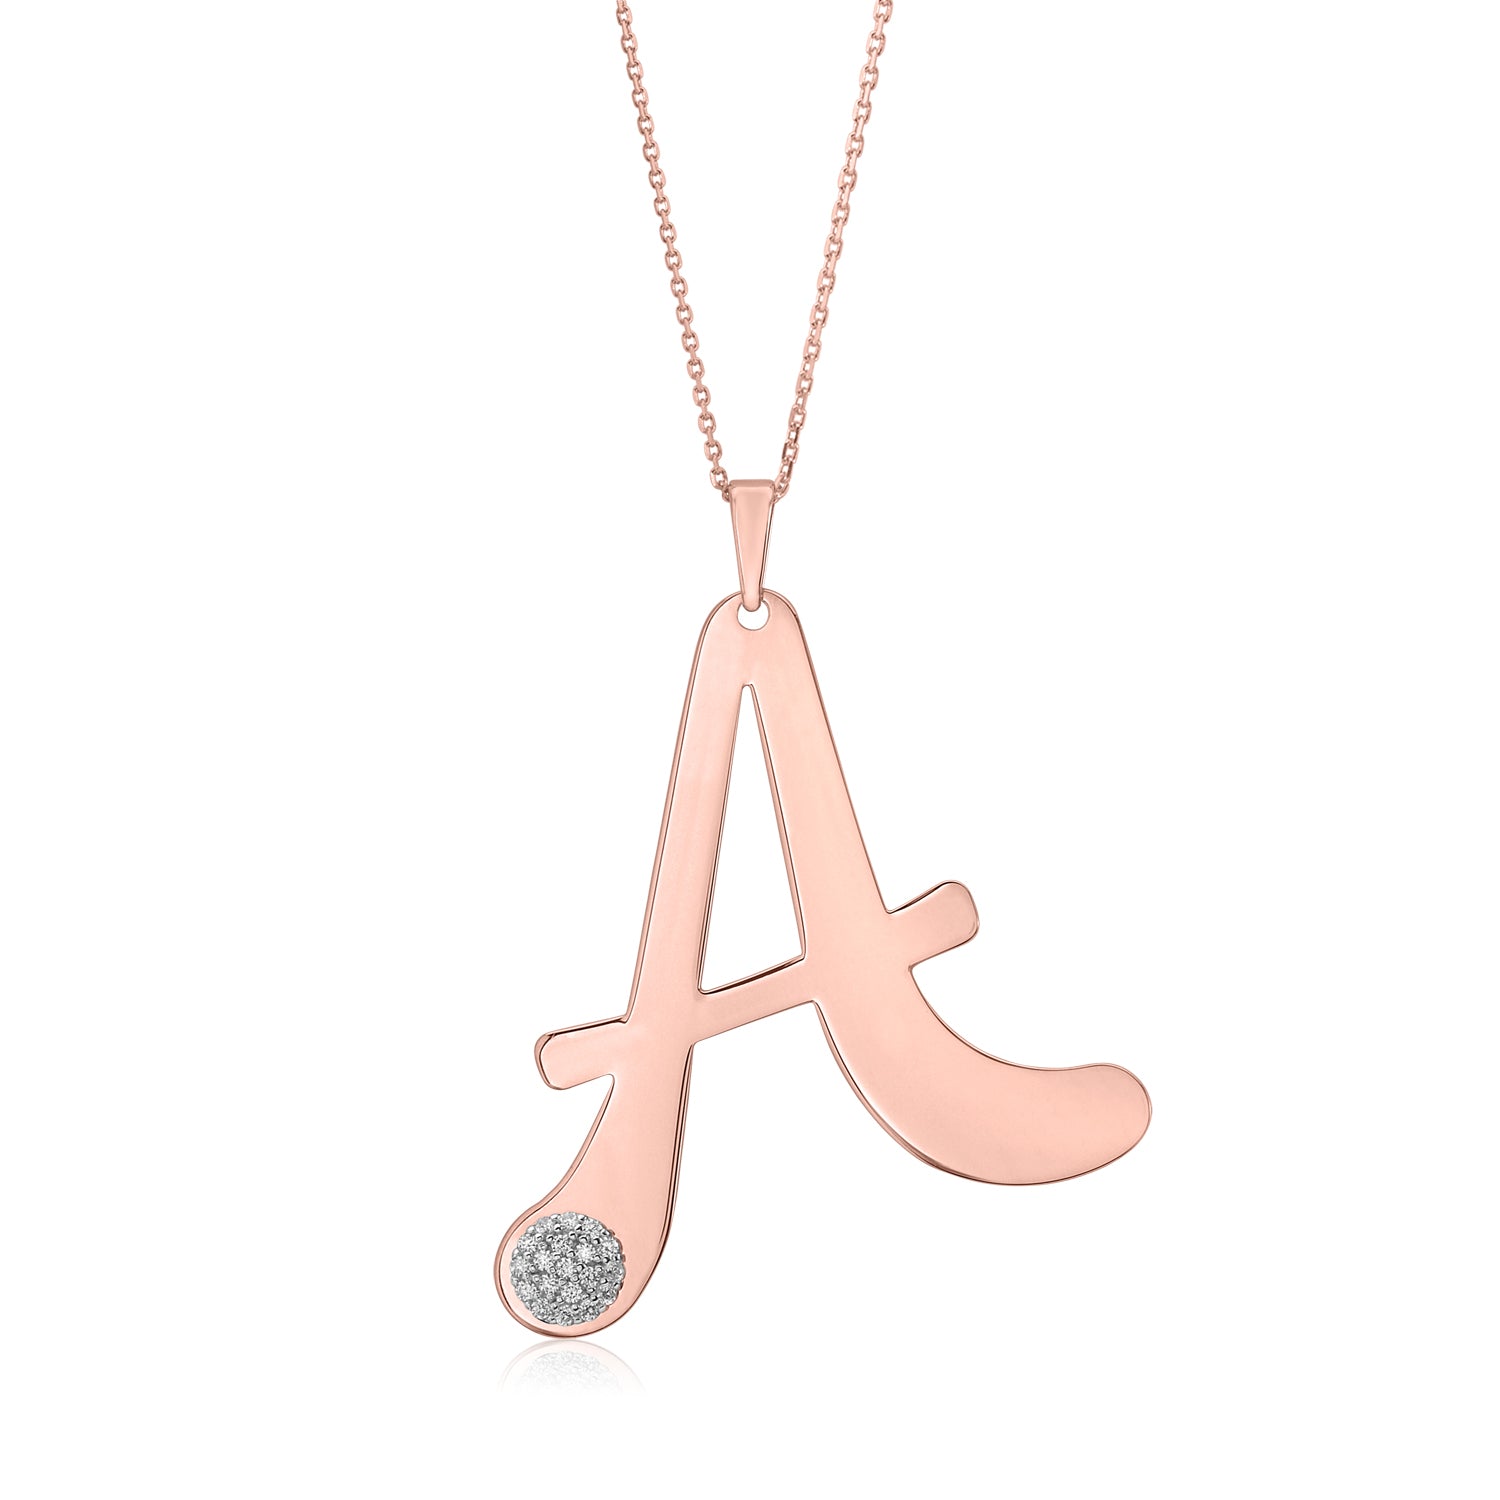 Initial Pendant in Rose Gold Plated Sterling Silver with CZ Letters on 20" Chain